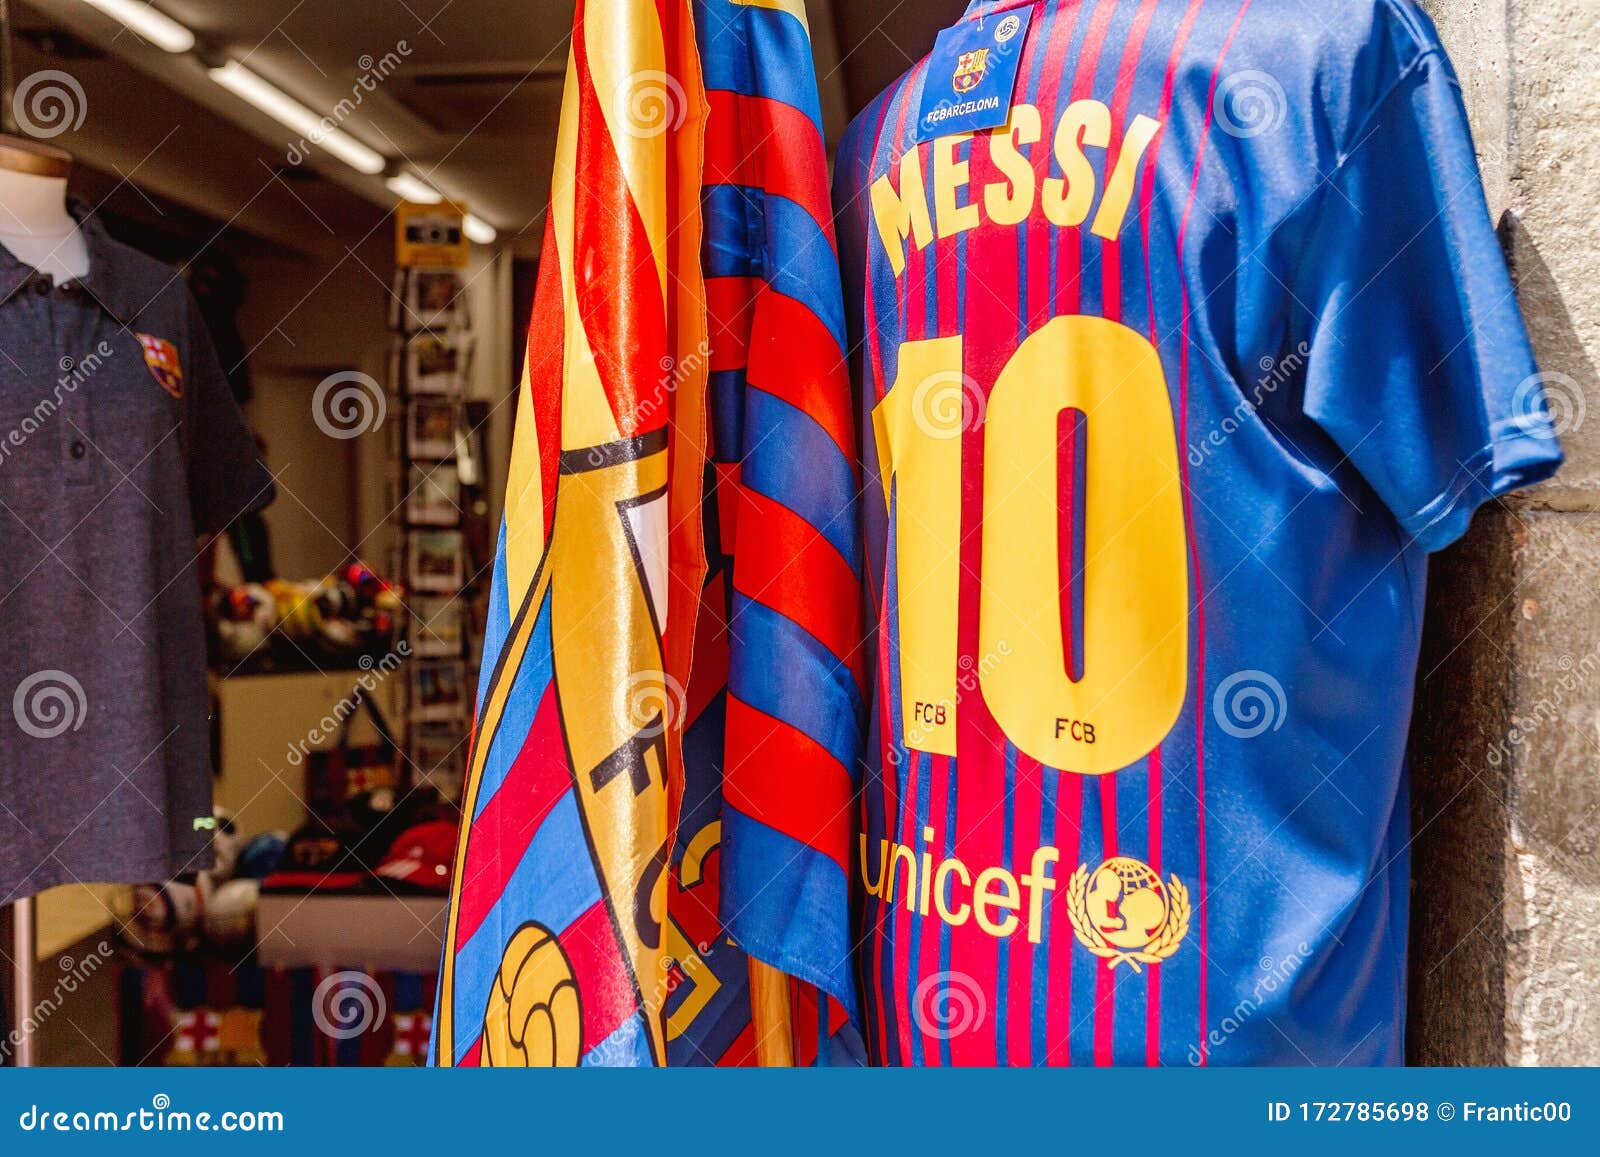 231 Lionel Messi Barcelona Shirt Stock Photos - Free & Royalty